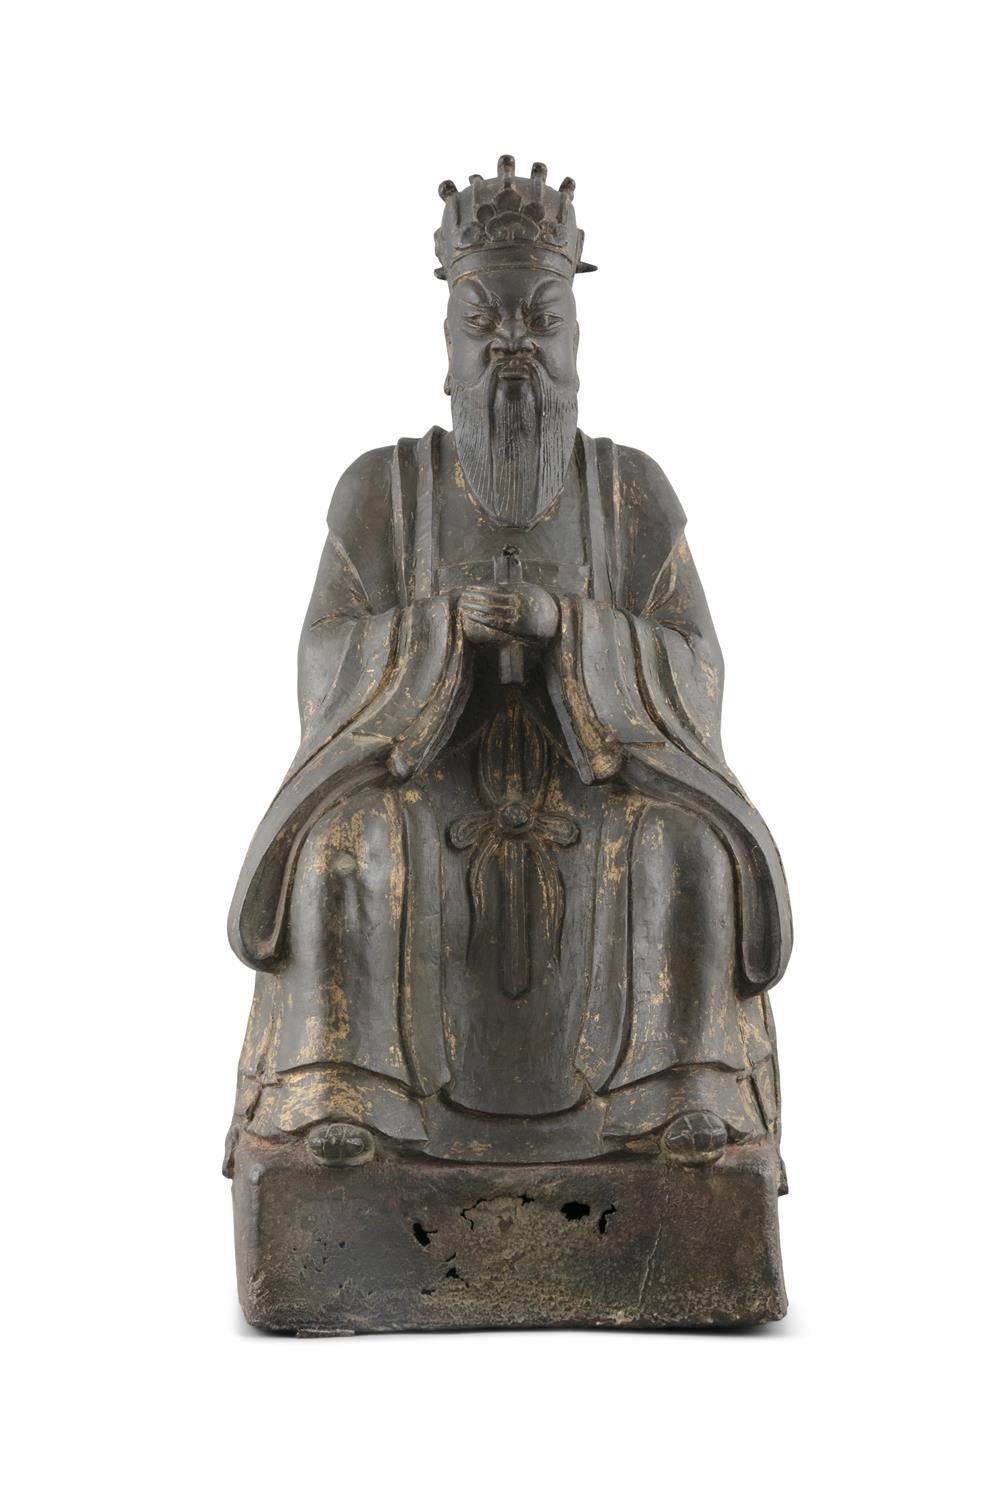 A LARGE PARCEL GILT LACQUERED BRONZE FIGURE OF A SEATED DAOIST GOD China, Ming Dynasty,